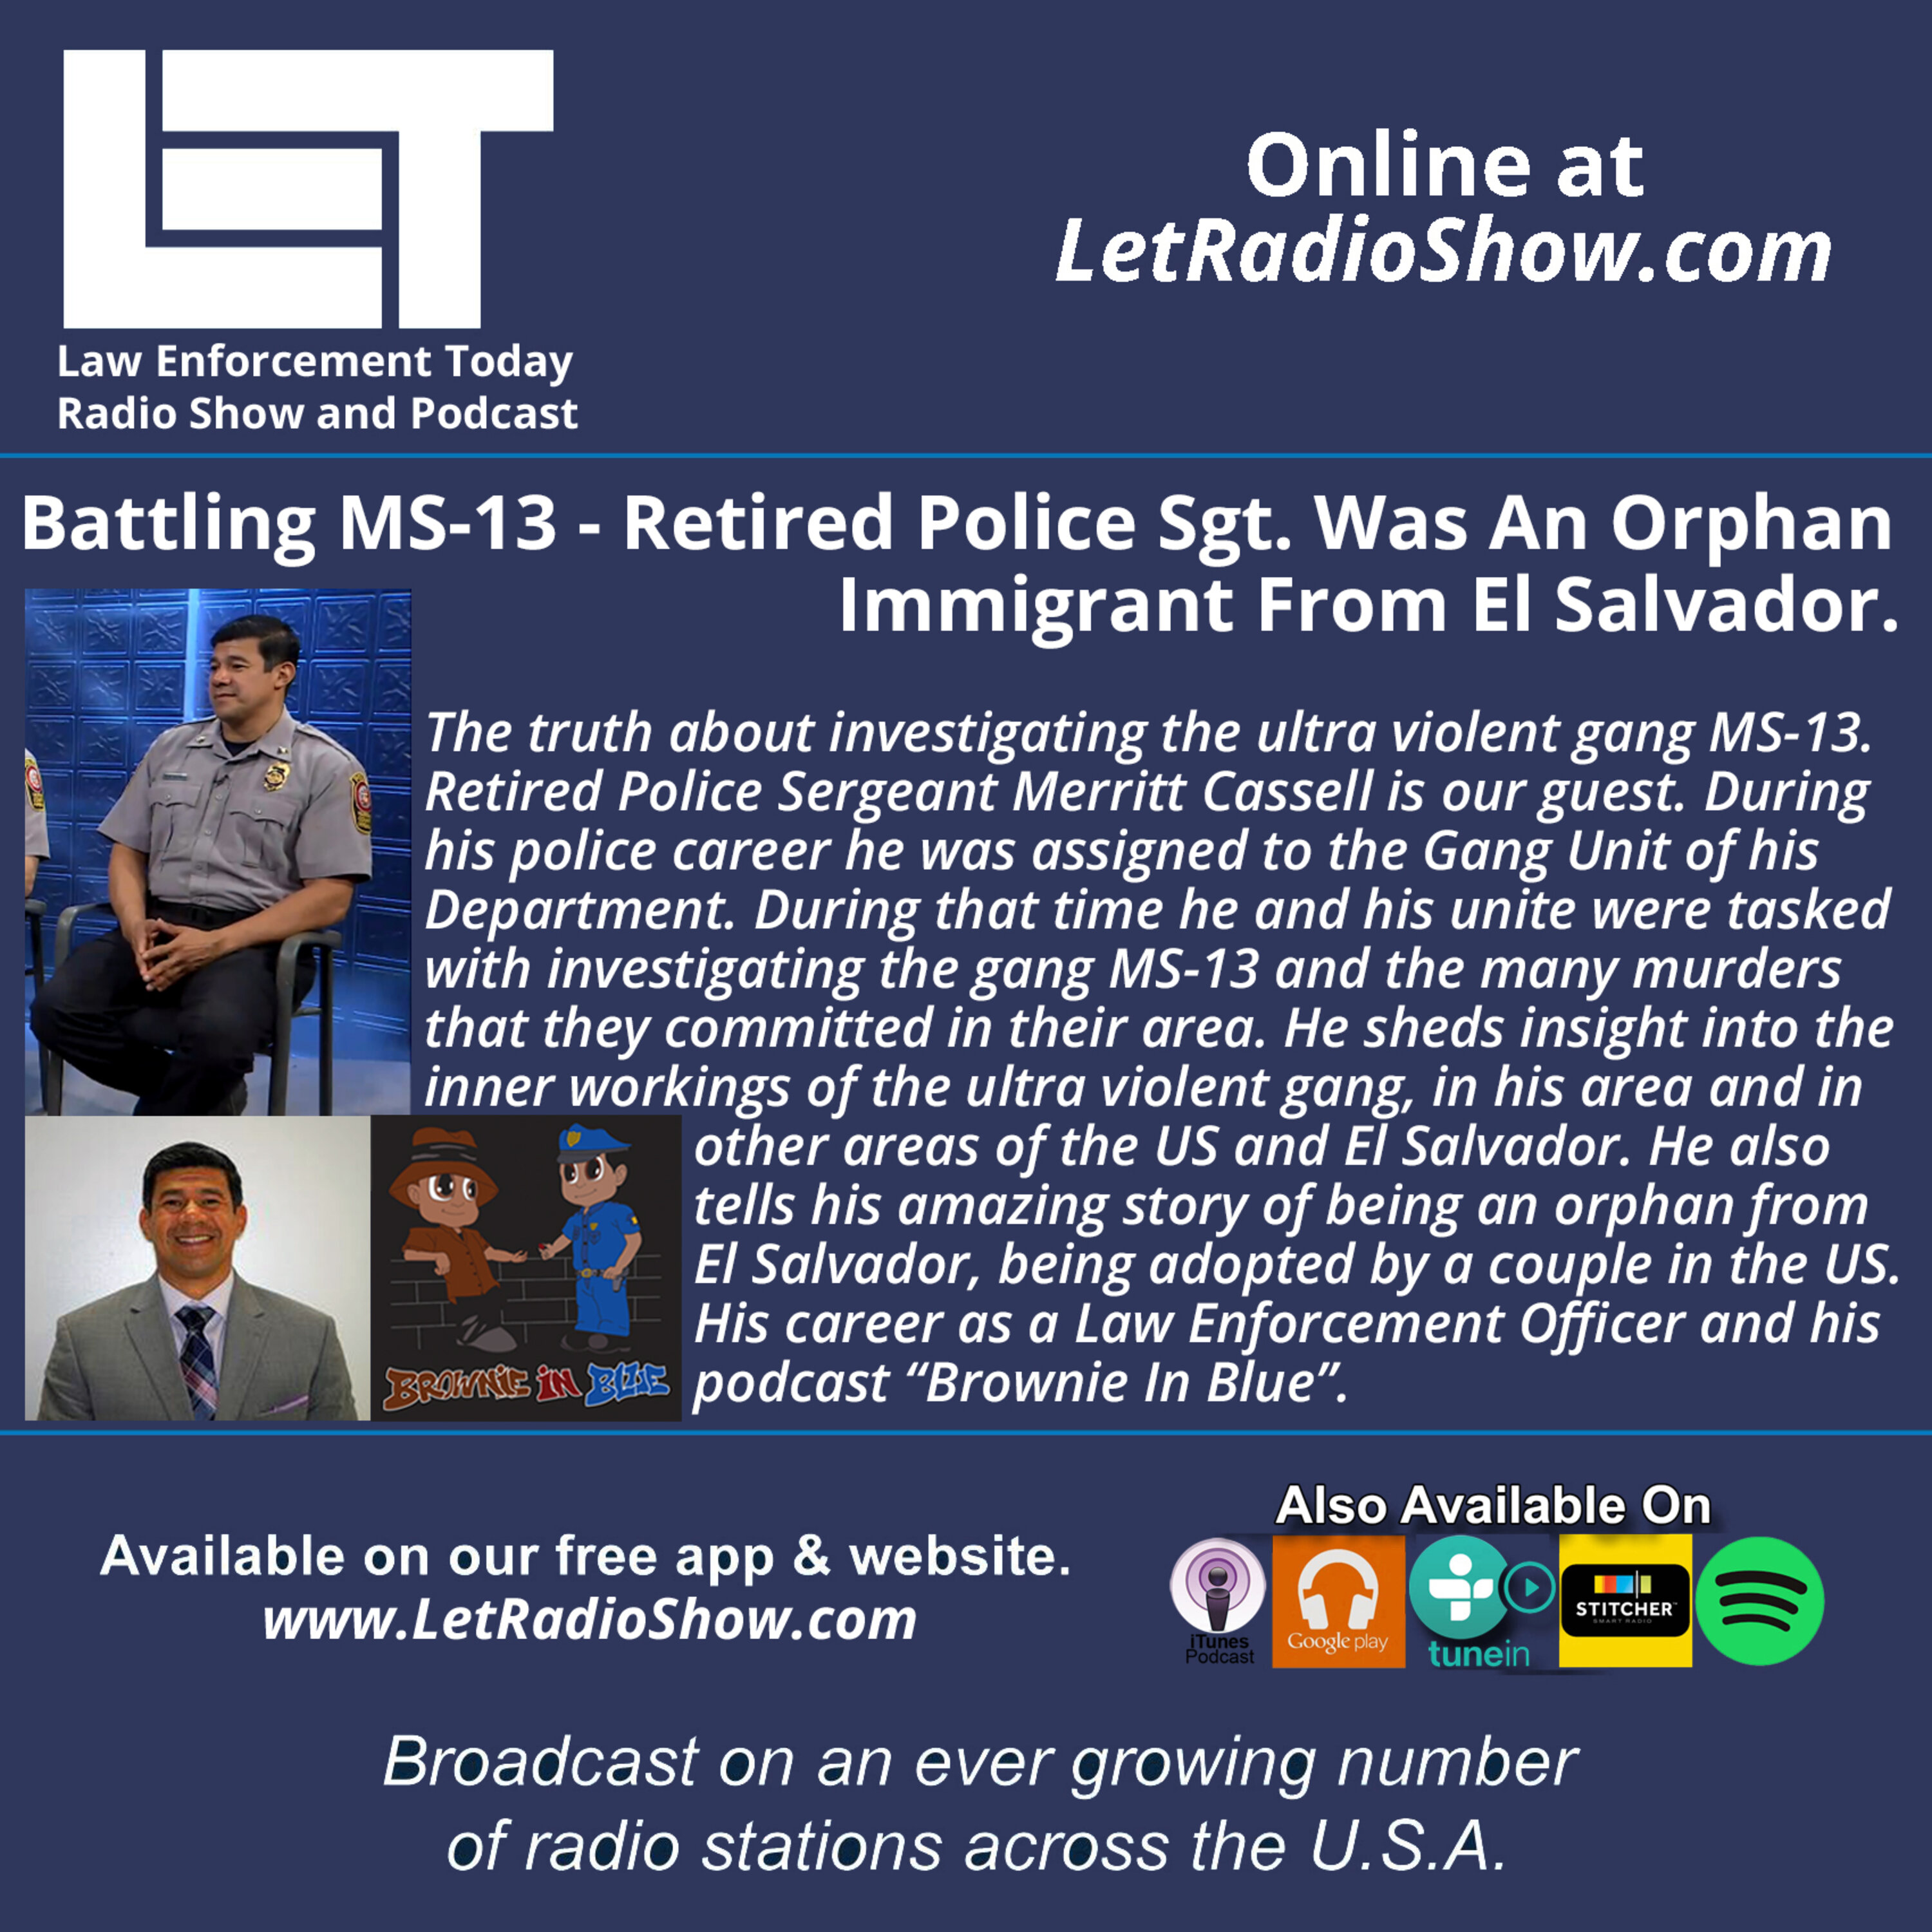 S5E25: Battling MS-13 - Retired Police Sgt. Was an Orphan Immigrant from El Salvador.